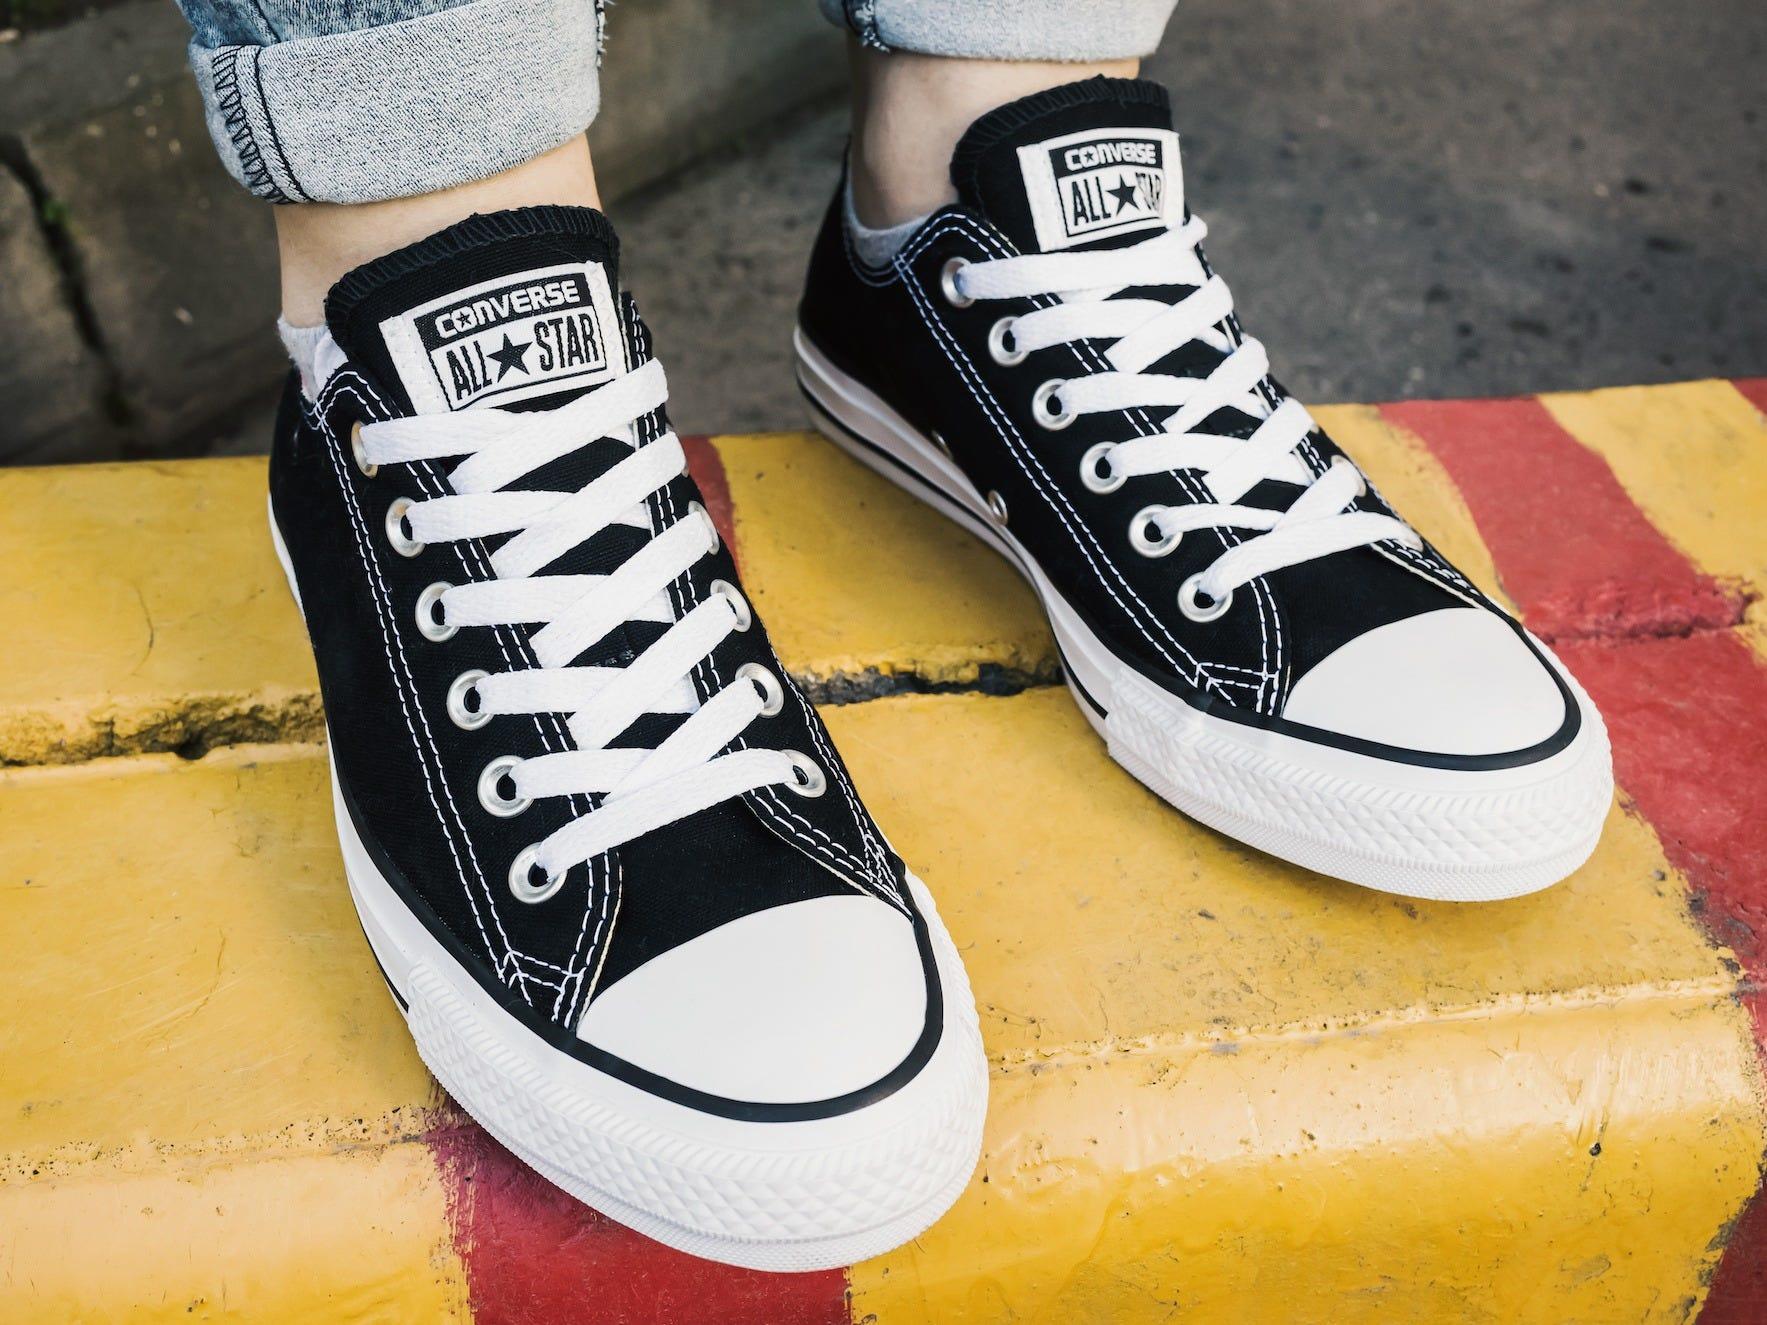 Espinas bancarrota fascismo Zappos is now selling single shoes and mixed-size pairs to help customers  find their perfect fit | Business Insider India